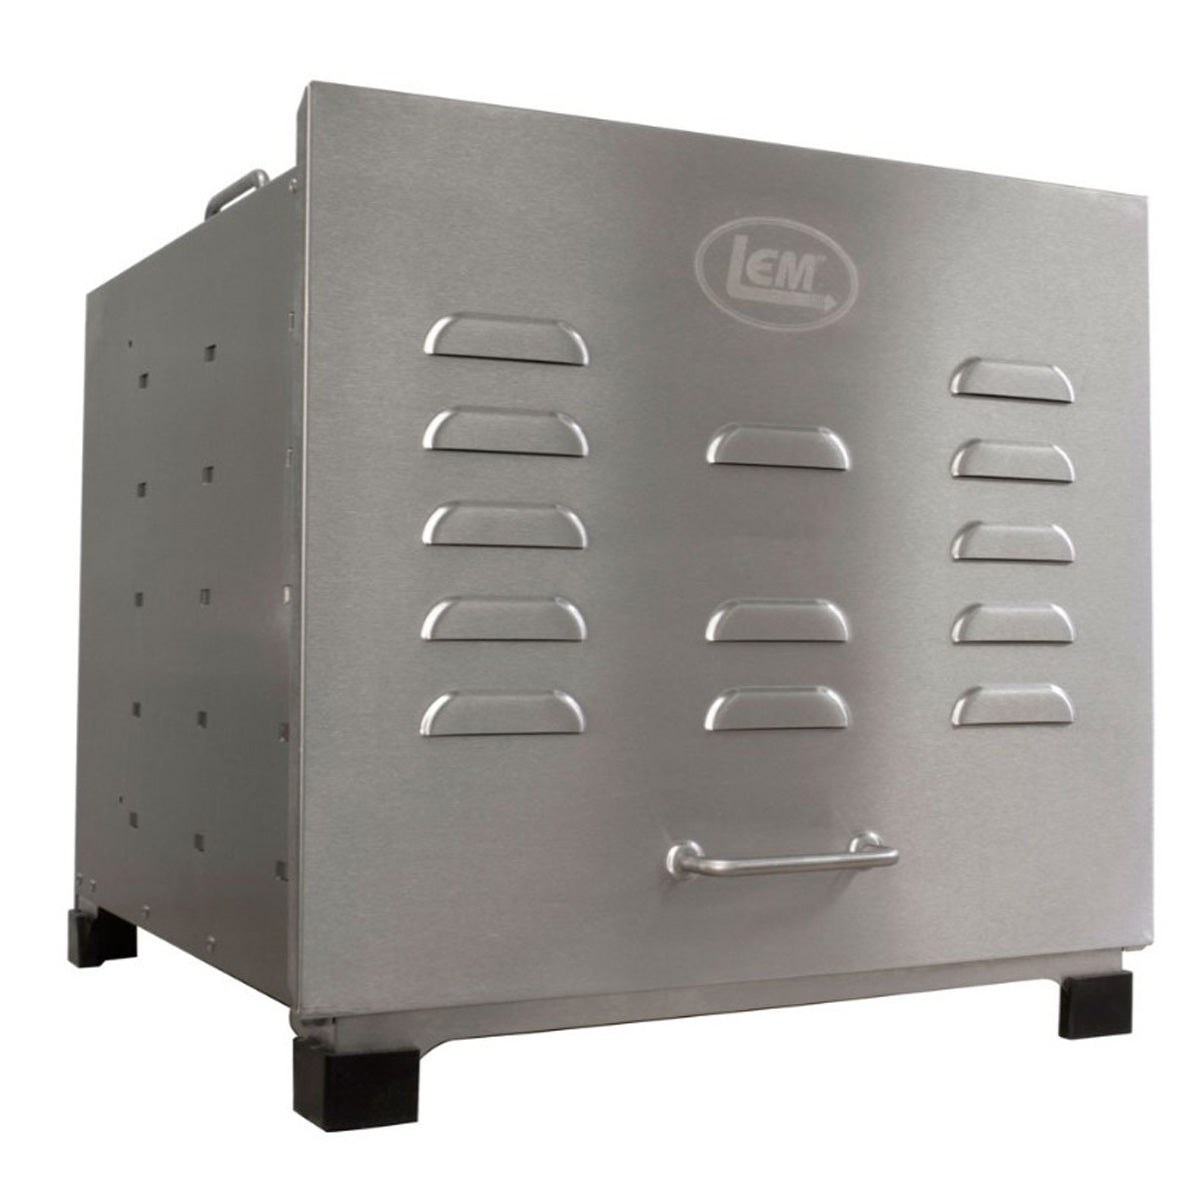 LEM Big Bite Dehydrator Jerky Maker Stainless Steel 10 Tray with 12 Hour Timer